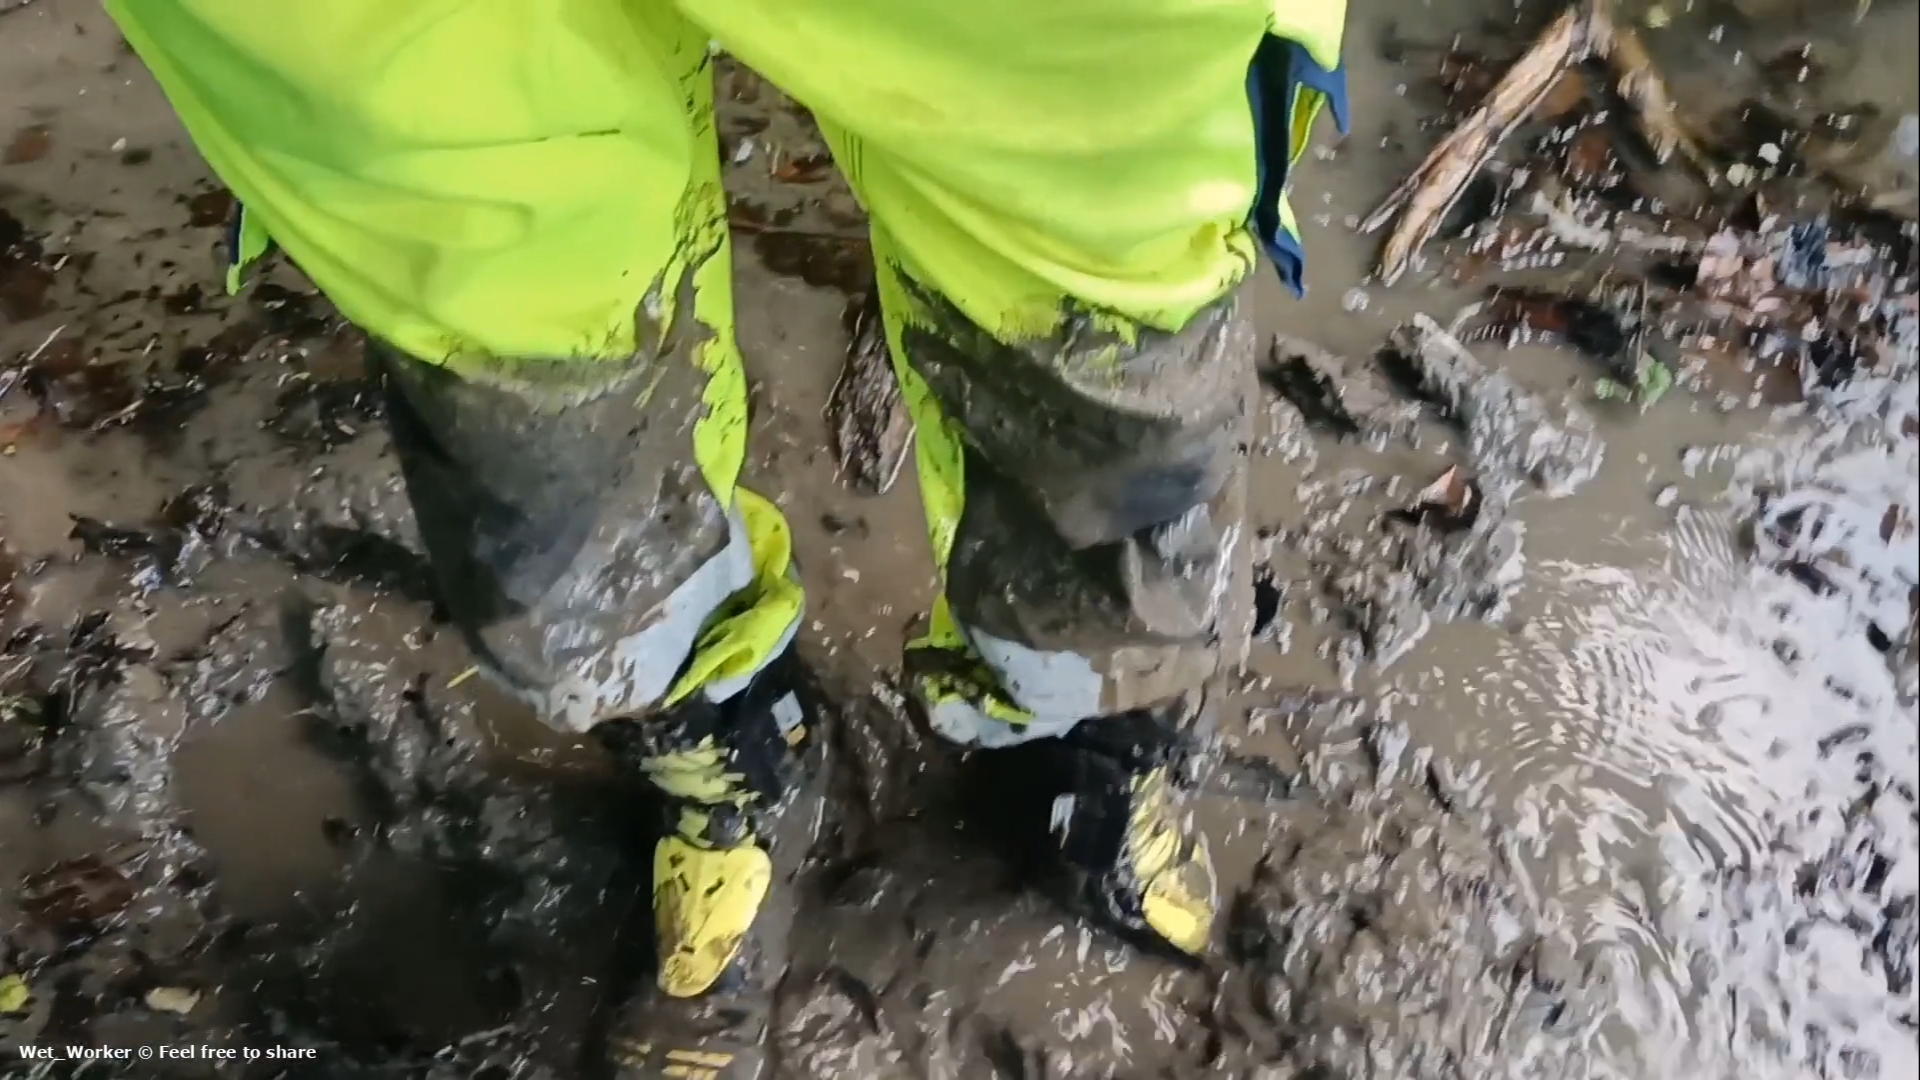 After work piss & mud fun while wearing full work gear